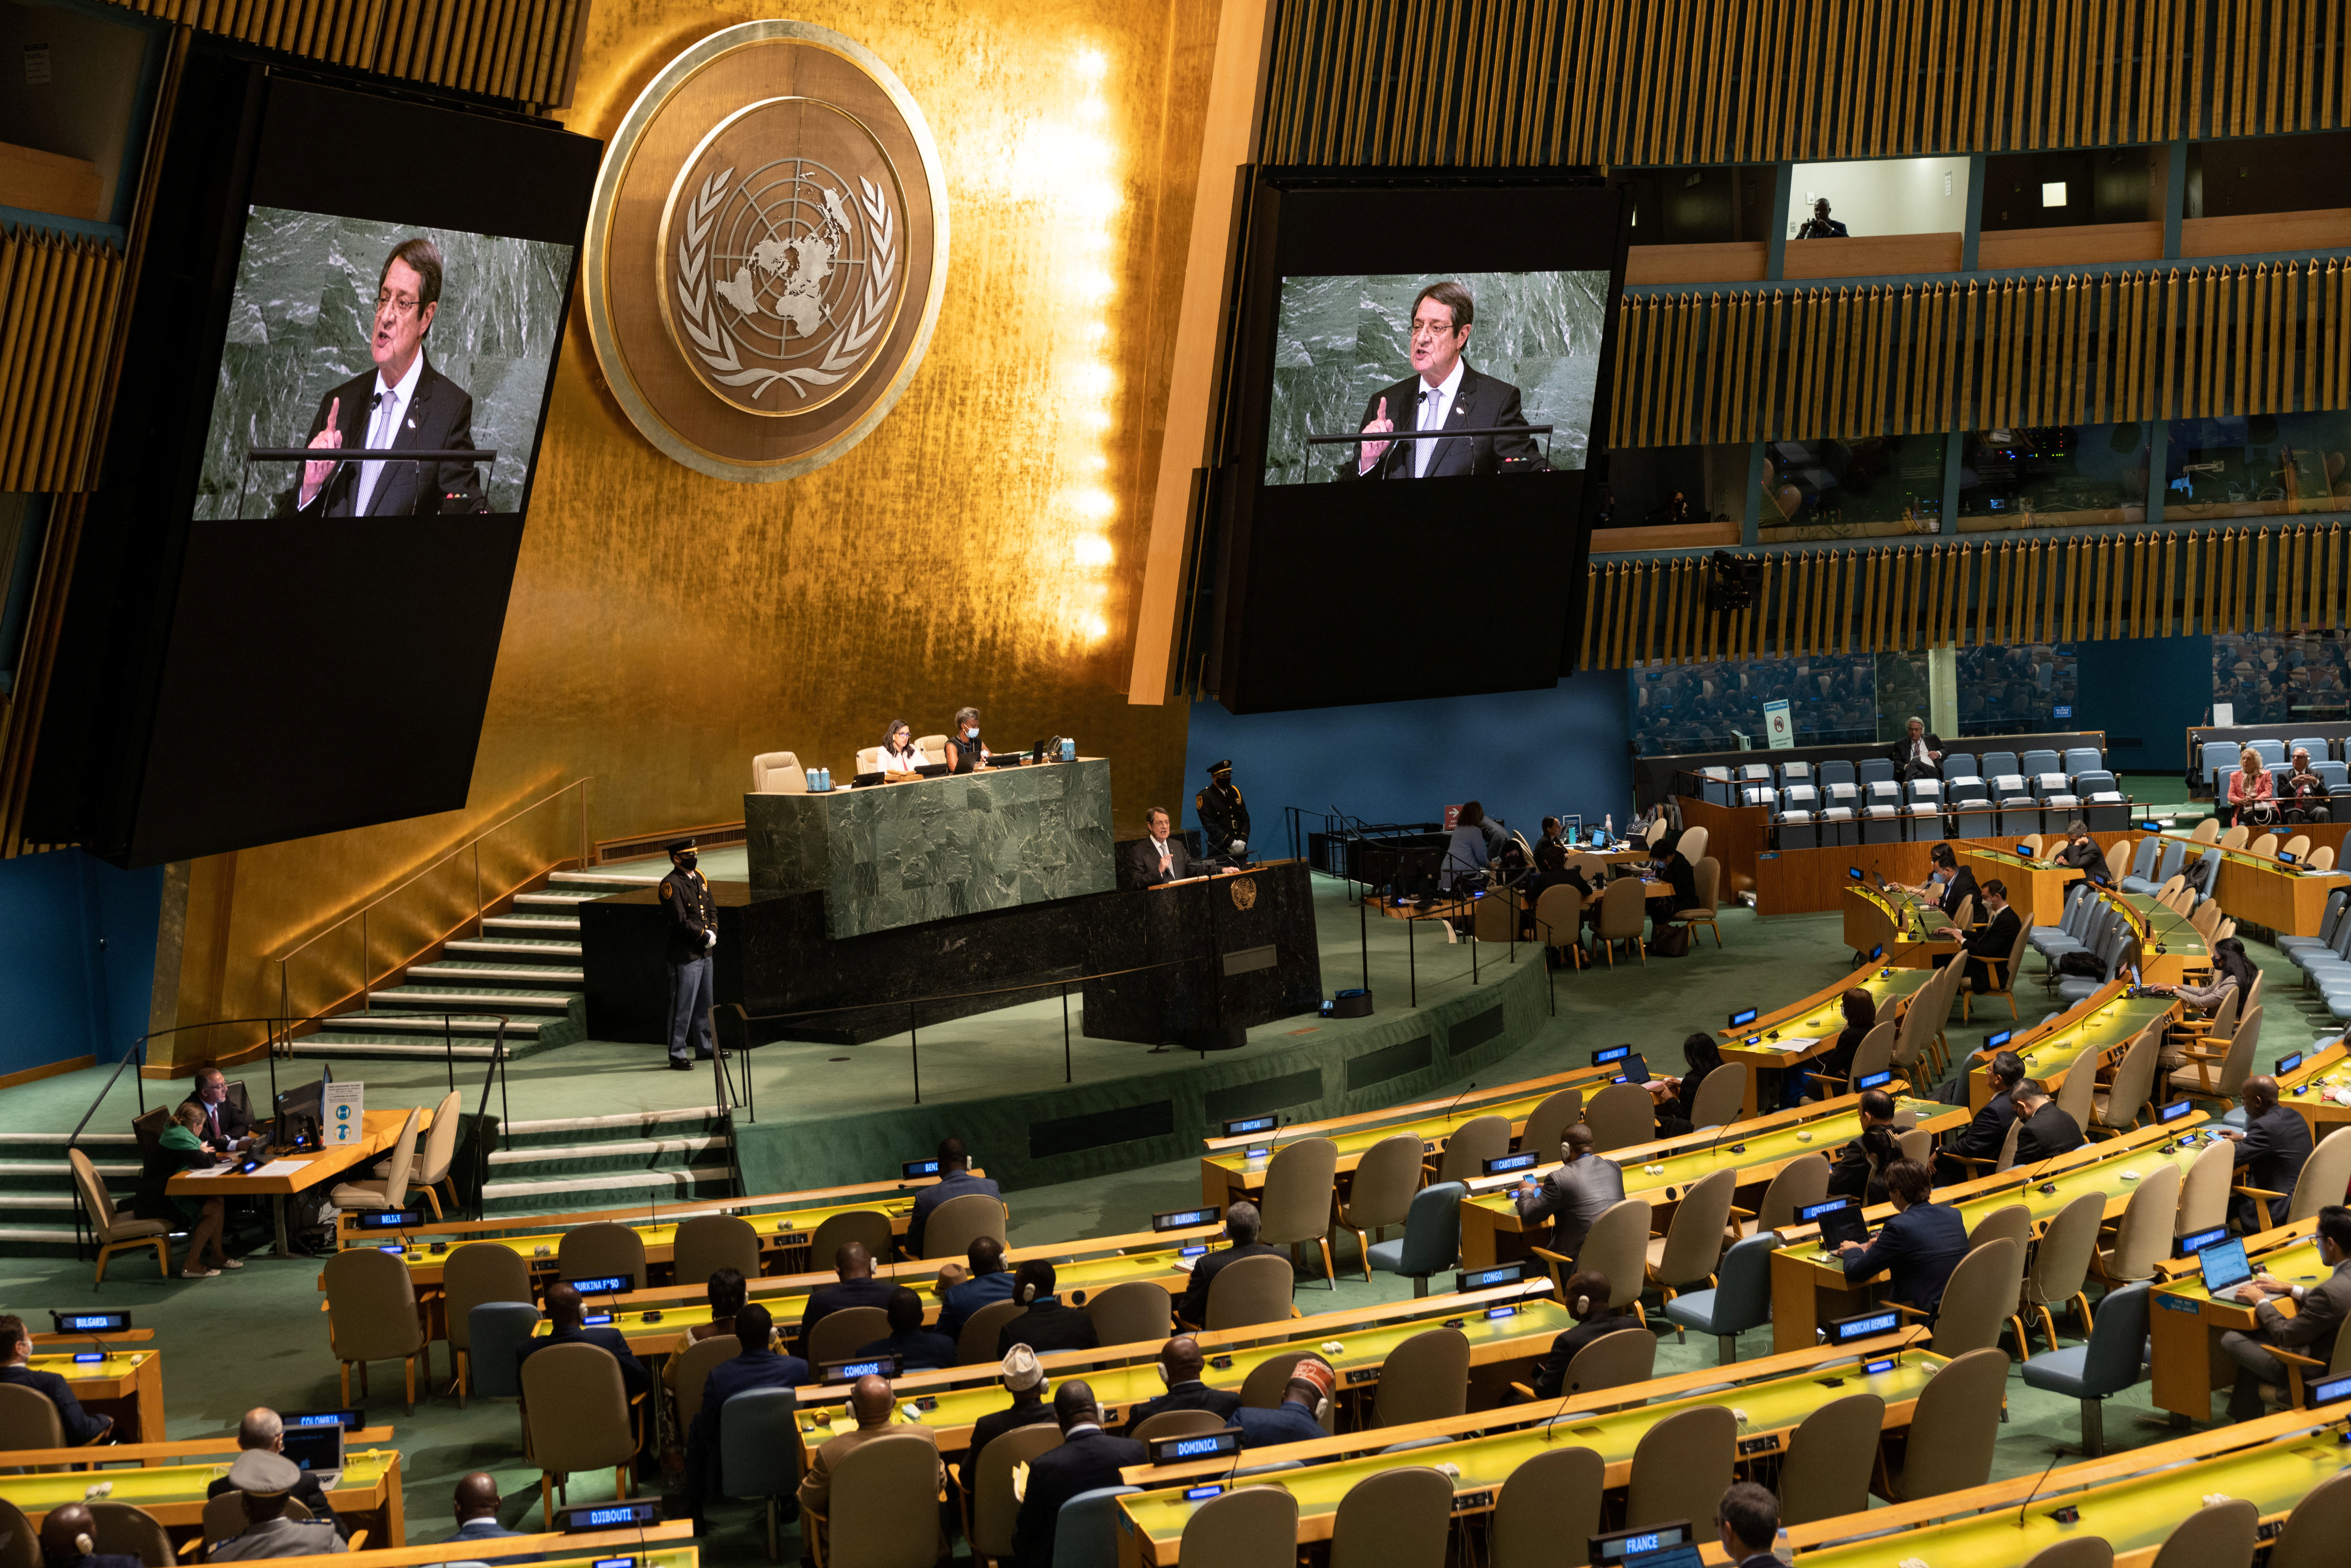 image Anastasiades questions credibility of UN during address to assembly